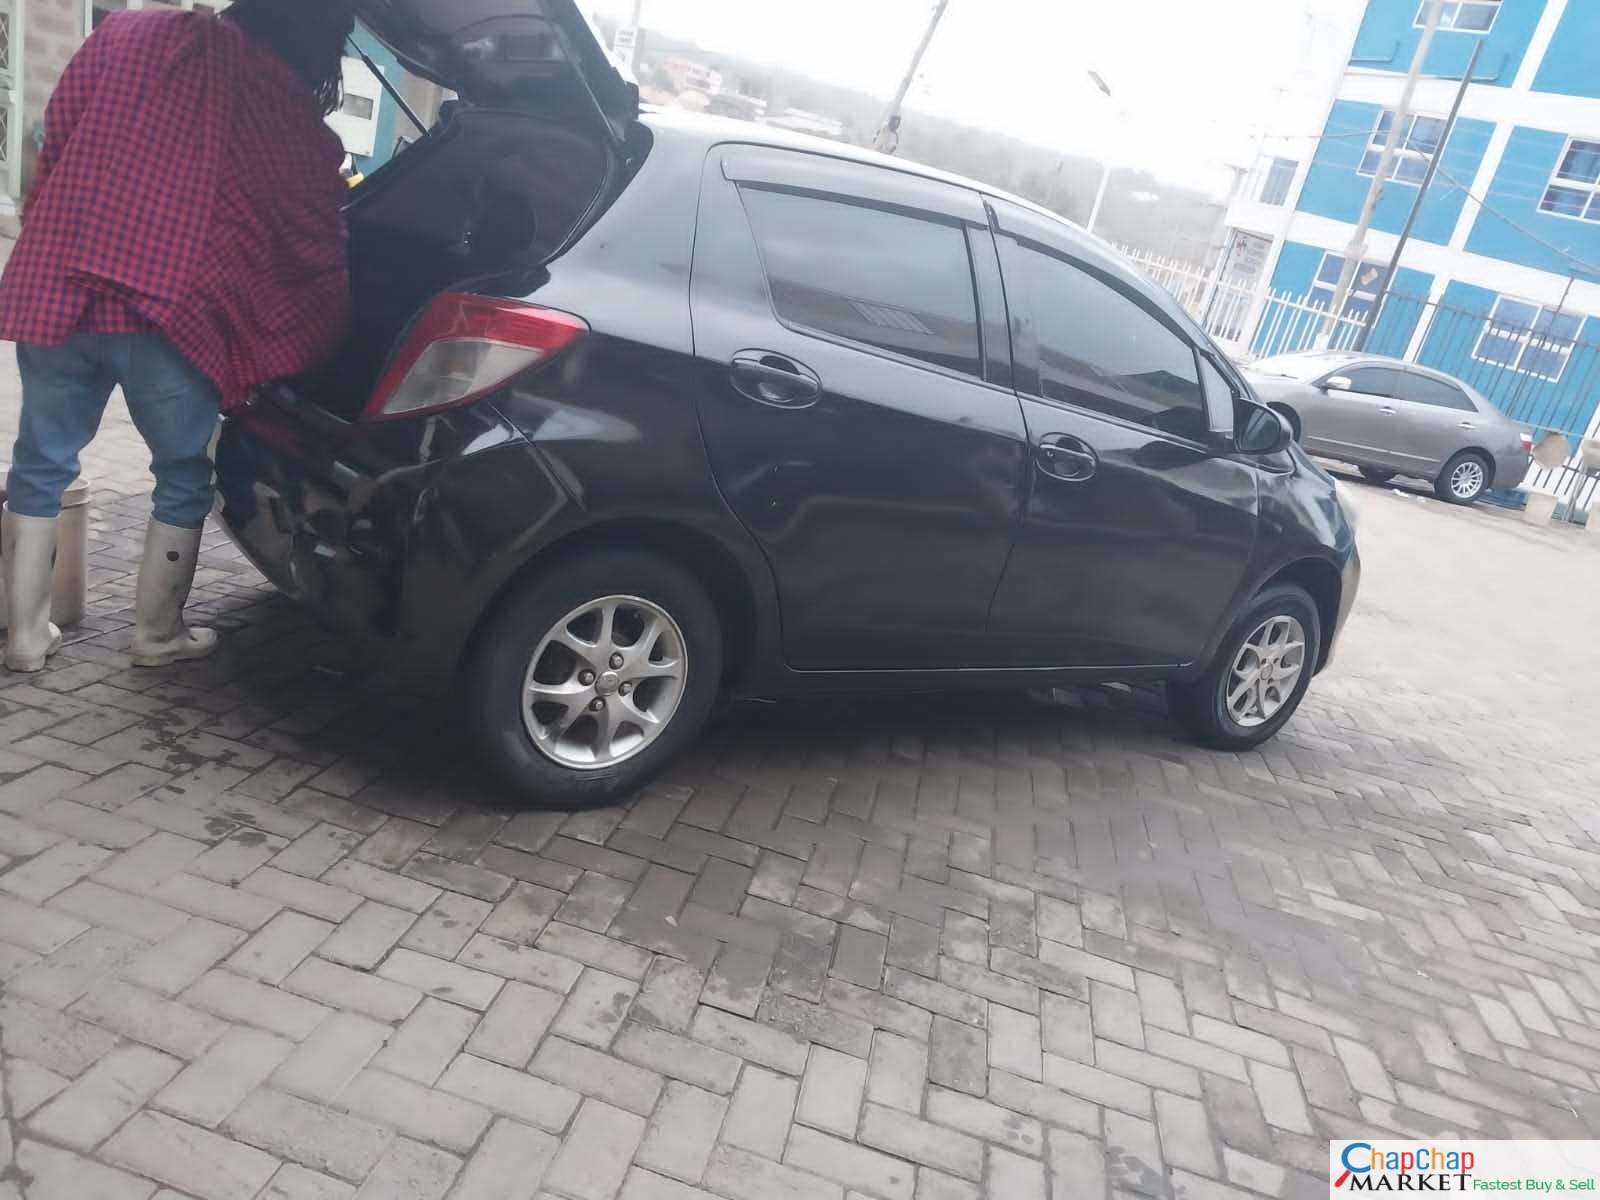 Toyota Vitz for sale in Kenya 2012 440k Only You Pay 30% Deposit Trade in OK EXCLUSIVE (SOLD)